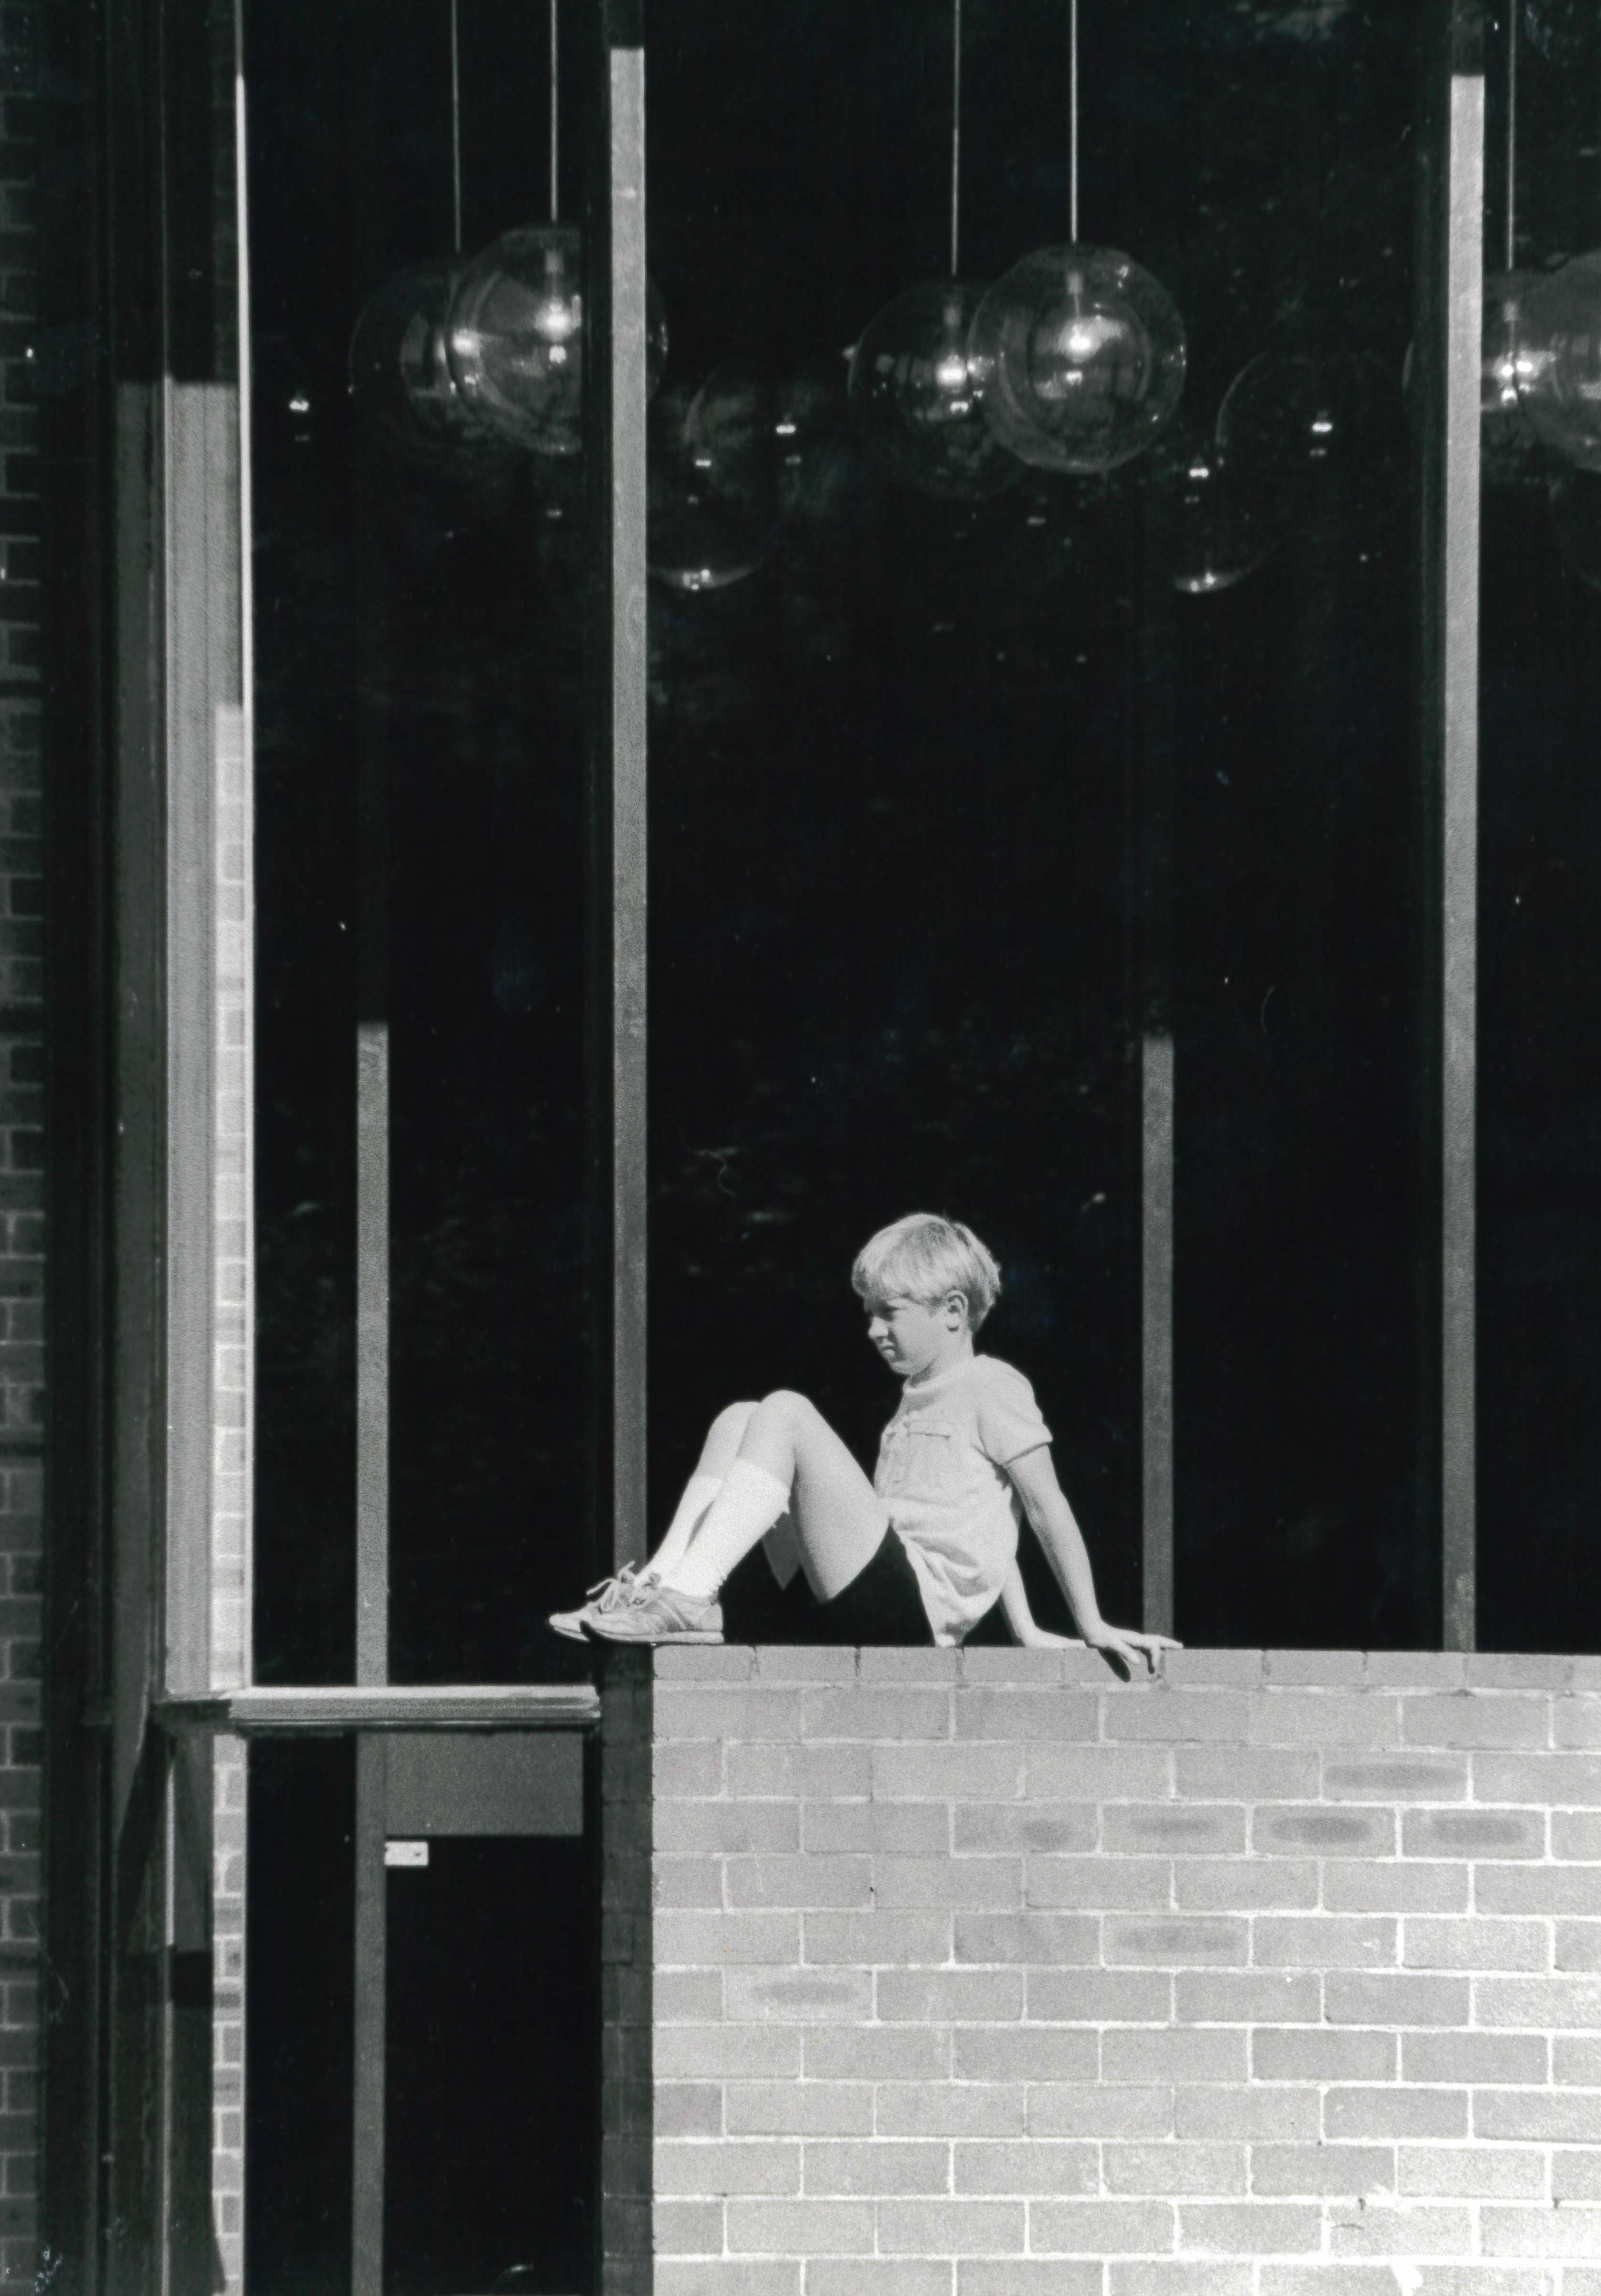 Black and white archival image of a Sydney Youth Theatre Festival in 1985 perched on a brick wall outside of the Seymour Centre.